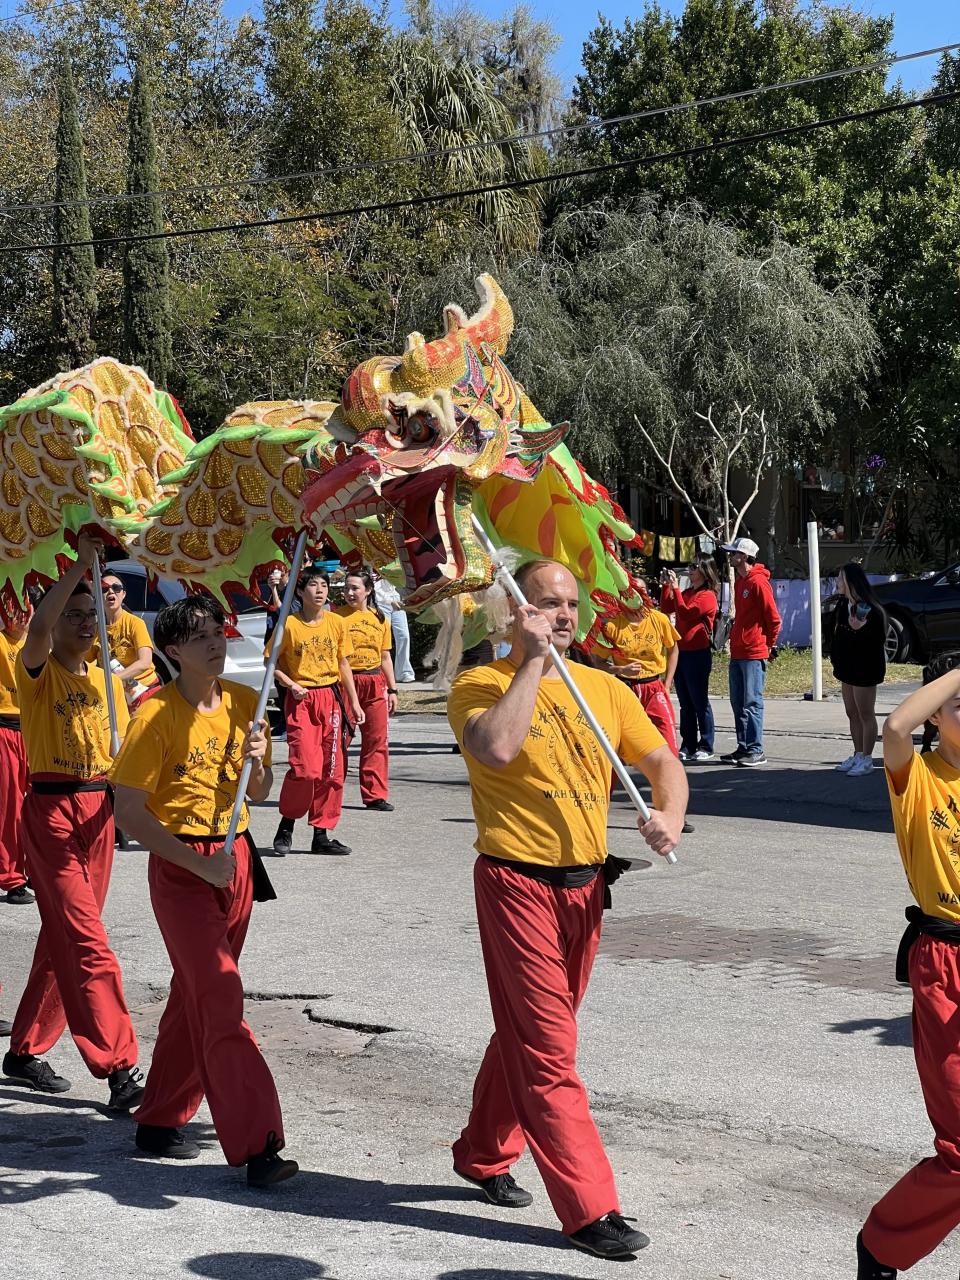 Local Asian organizations, City of Orlando and Orange County officials led the parade to celebrate the Lunar New Year.